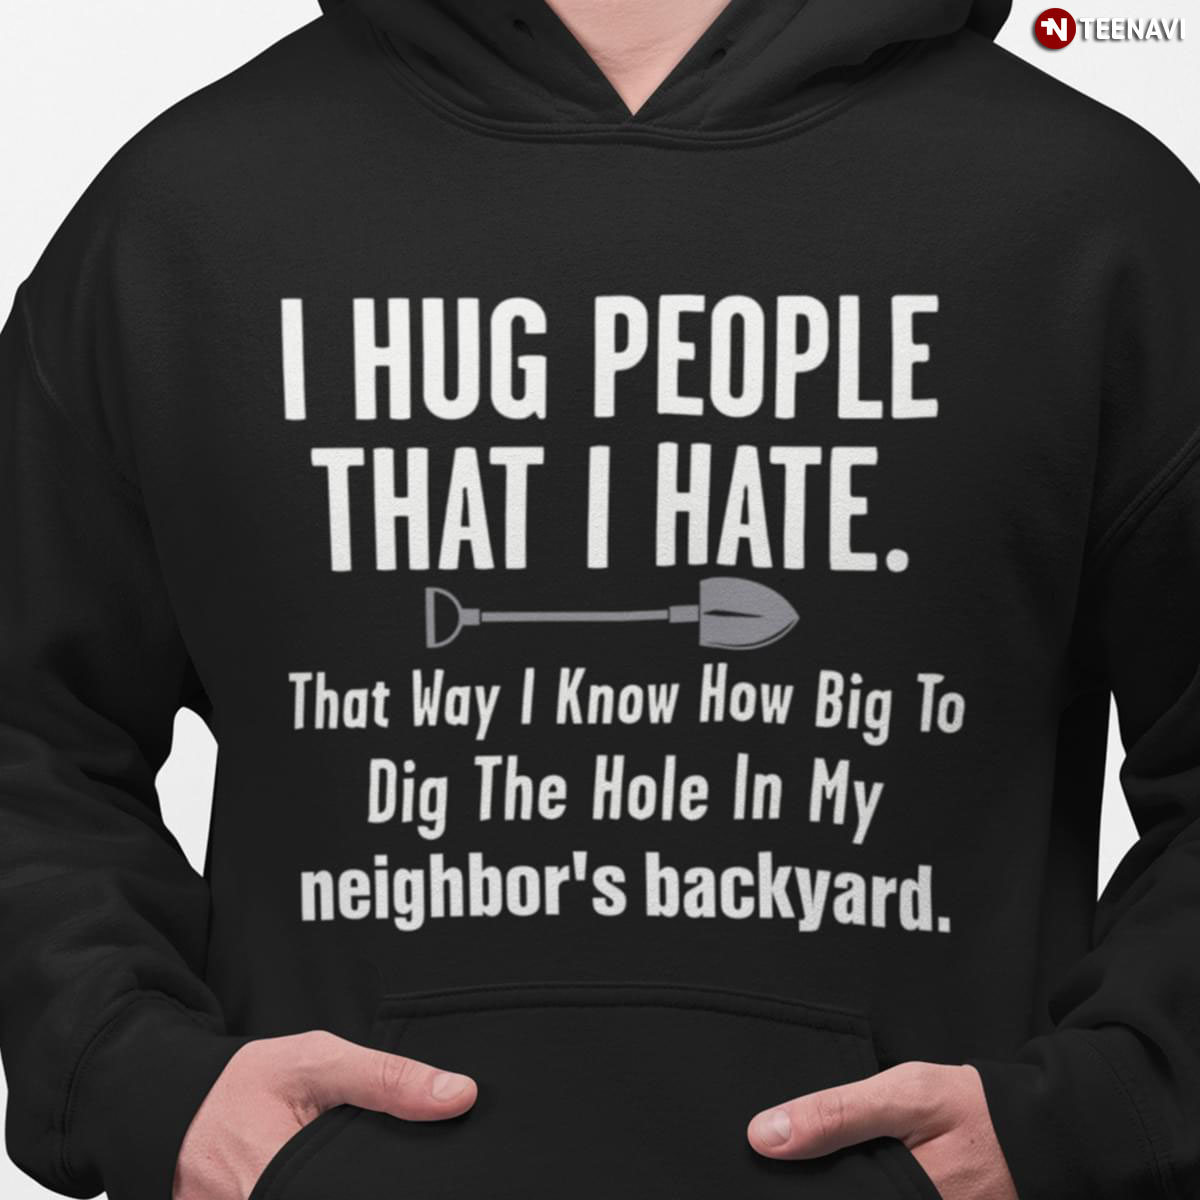 I Hug People That I Hate That Way I Know How Big To Dig The Hole In My Neighbor's Backyard